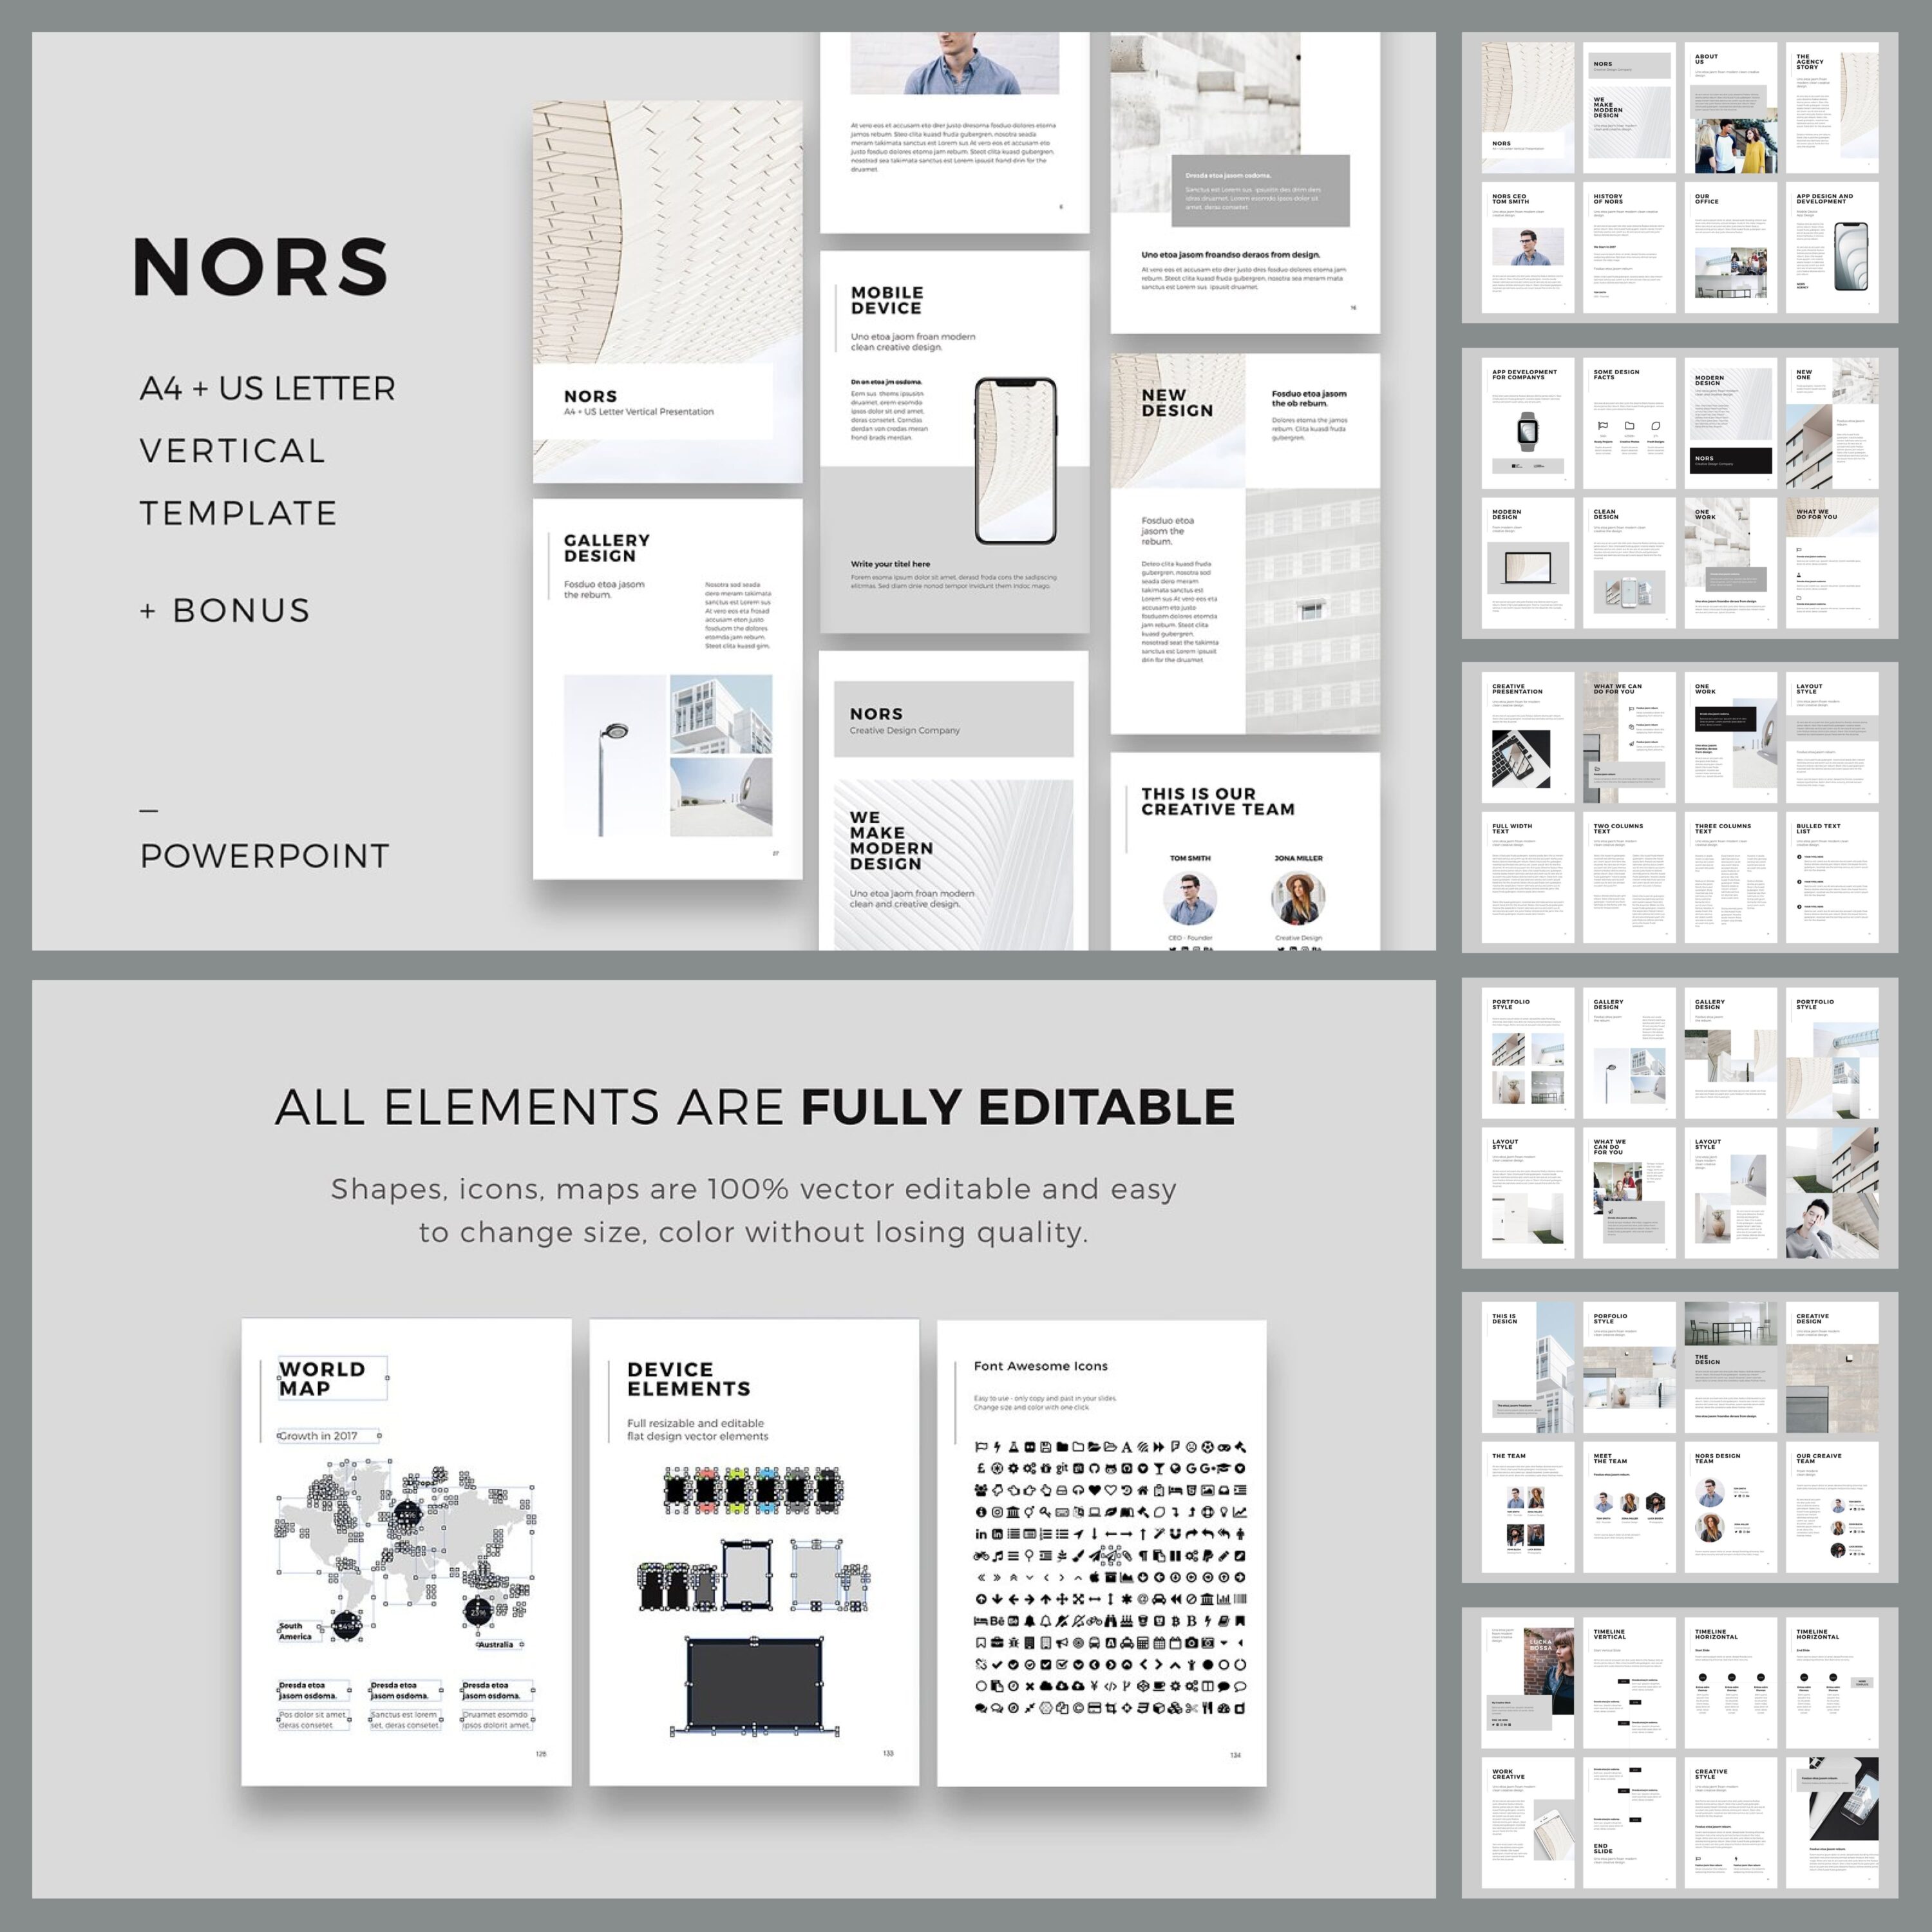 NORS Vertical Powerpoint + 20 Photos.